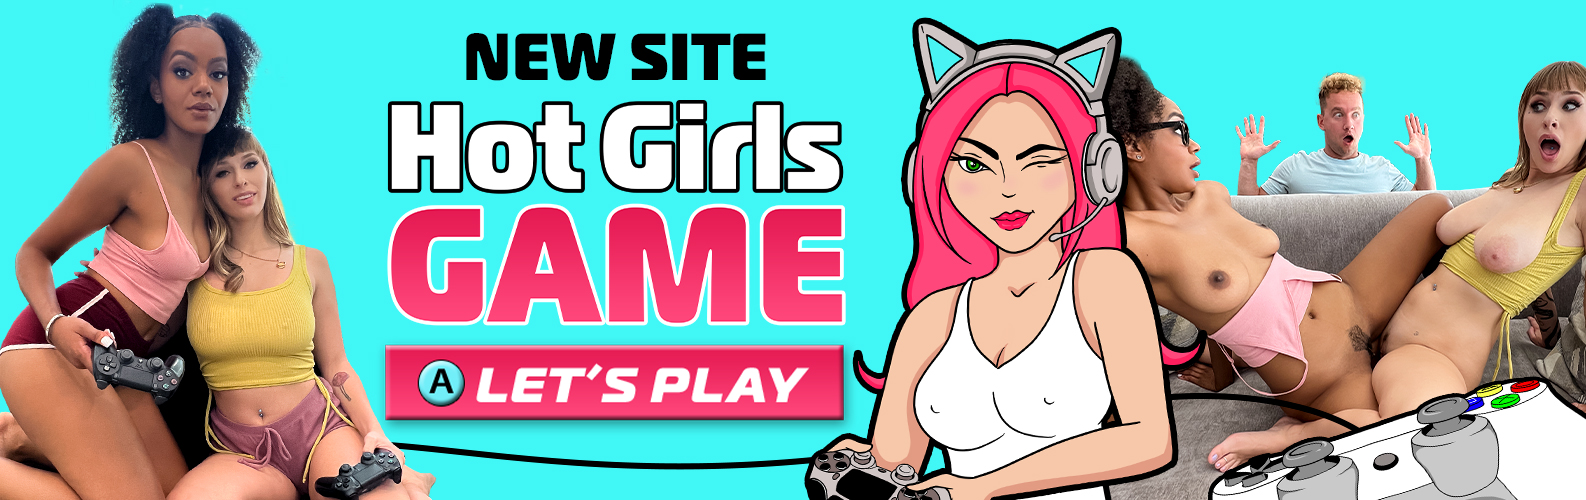 HOT GIRLS GAME presented by REALITY KINGS